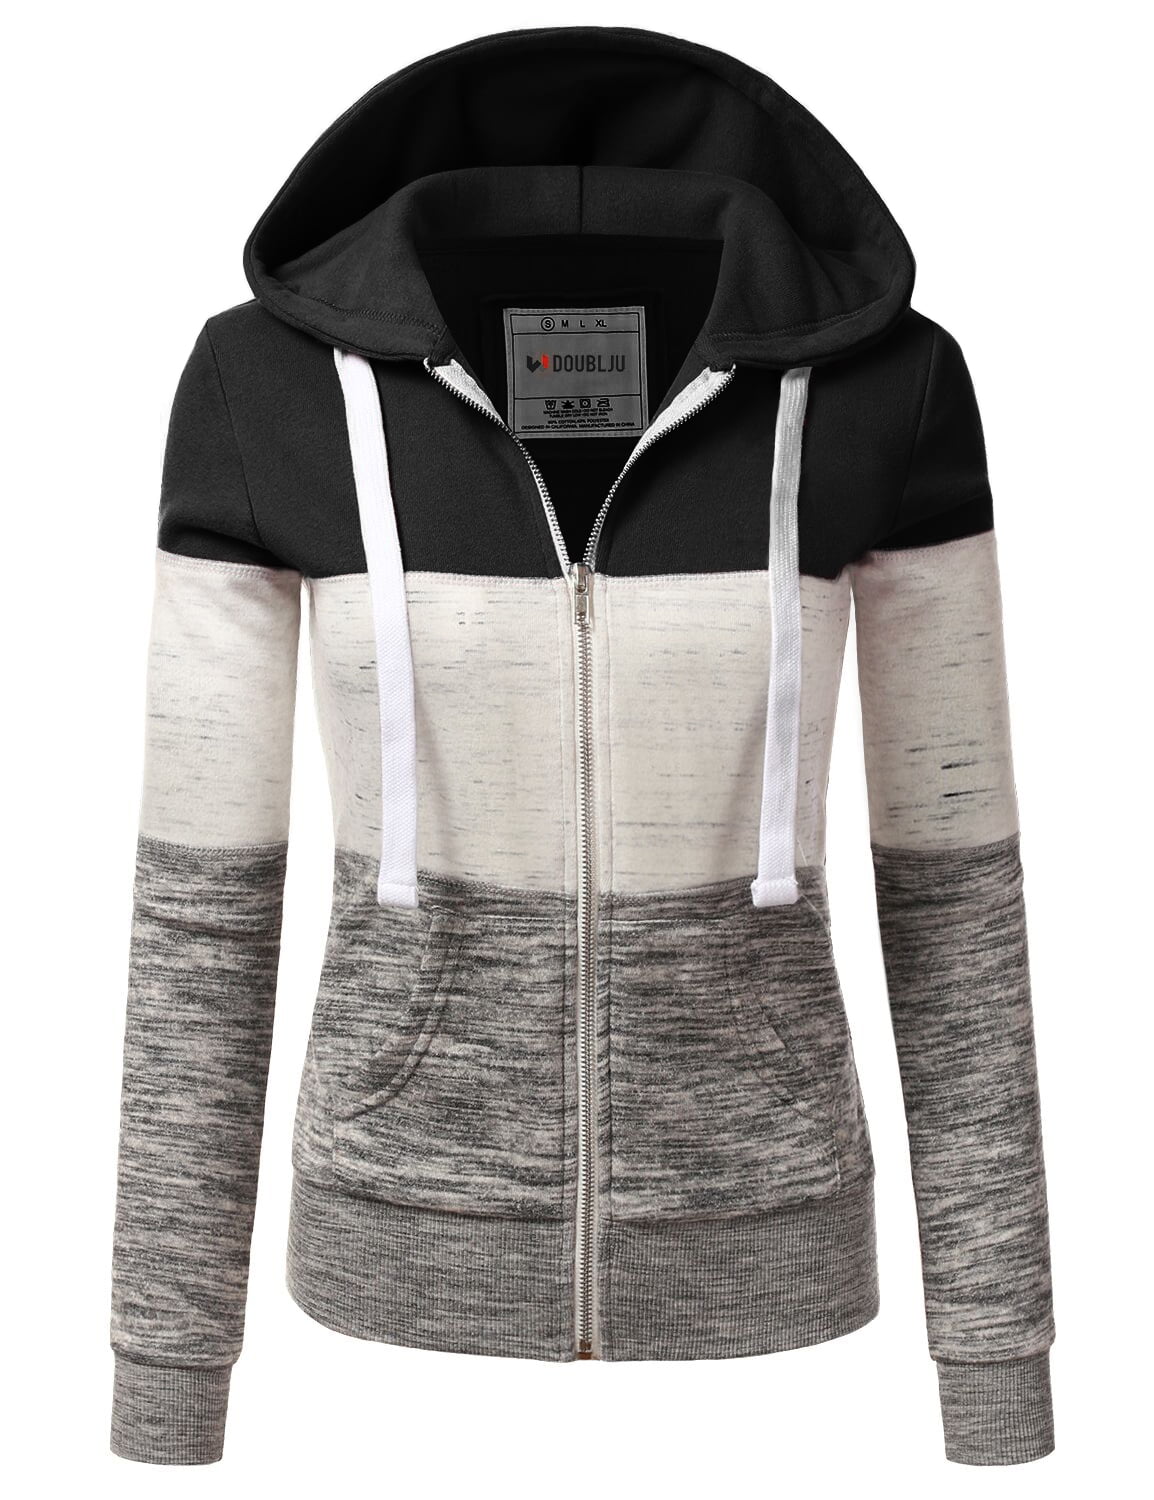 Hoodie Sweatshirts for Women,Casual Long Sleeve Color Block Hooded Pullover Tops with Pockets by Chaofanjiancai 